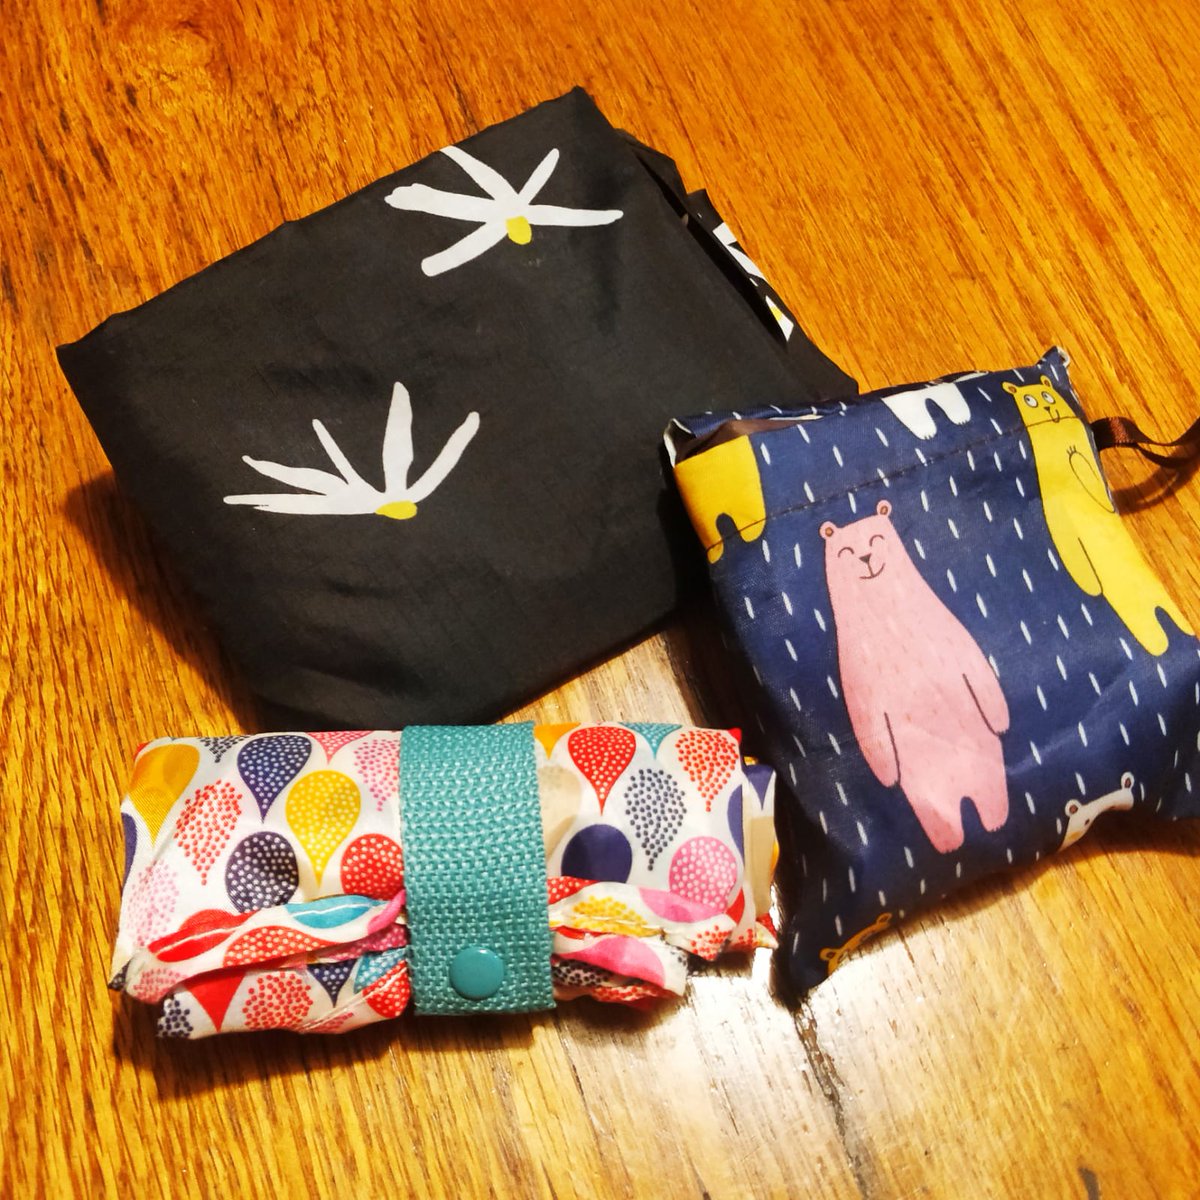 I started using reusable shopping bags when I moved to Japan & got tired of the many plastic bagsCheap way: Branded bags from events are great! Also, supermarket boxes.Bougie way: Get bundles of bags that are cute and pocketable.  https://amzn.to/3sDyDNy 